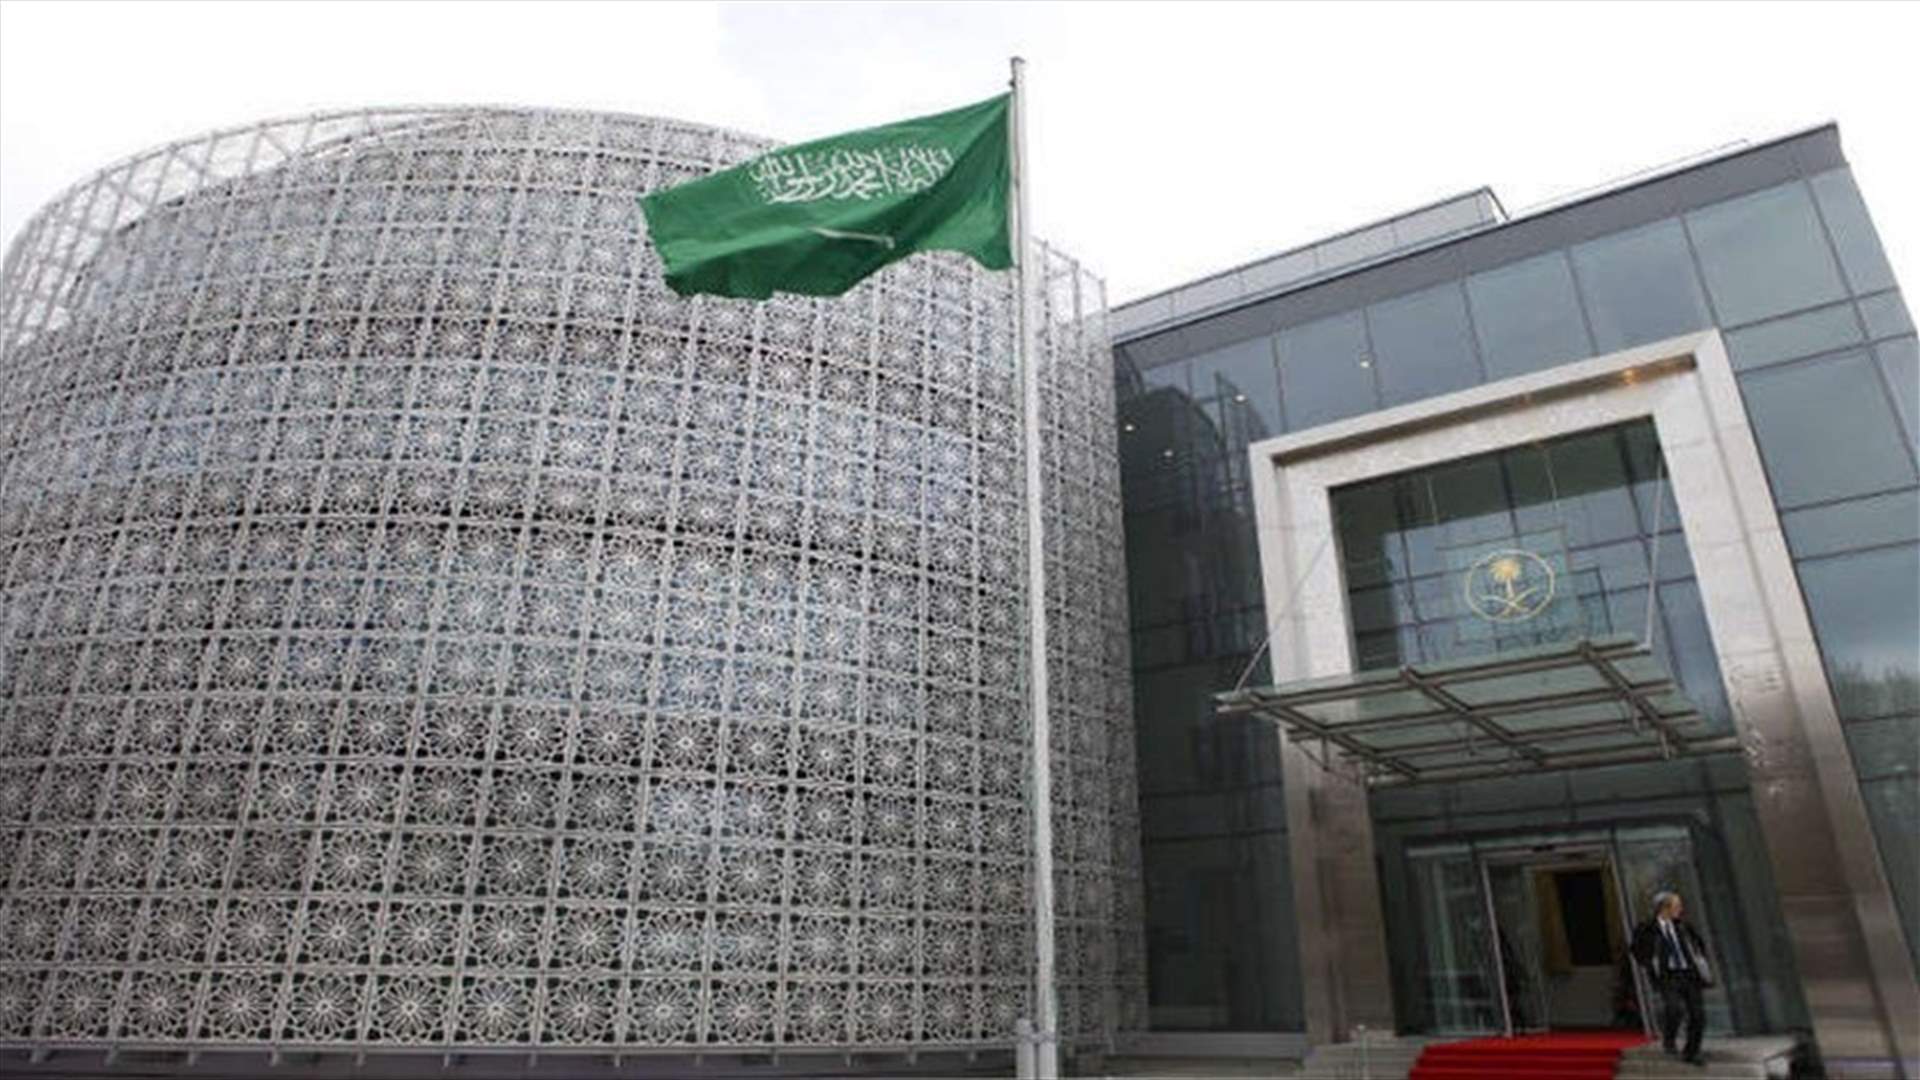 Saudi ambassador back in Berlin a year after leaving over Lebanon comments